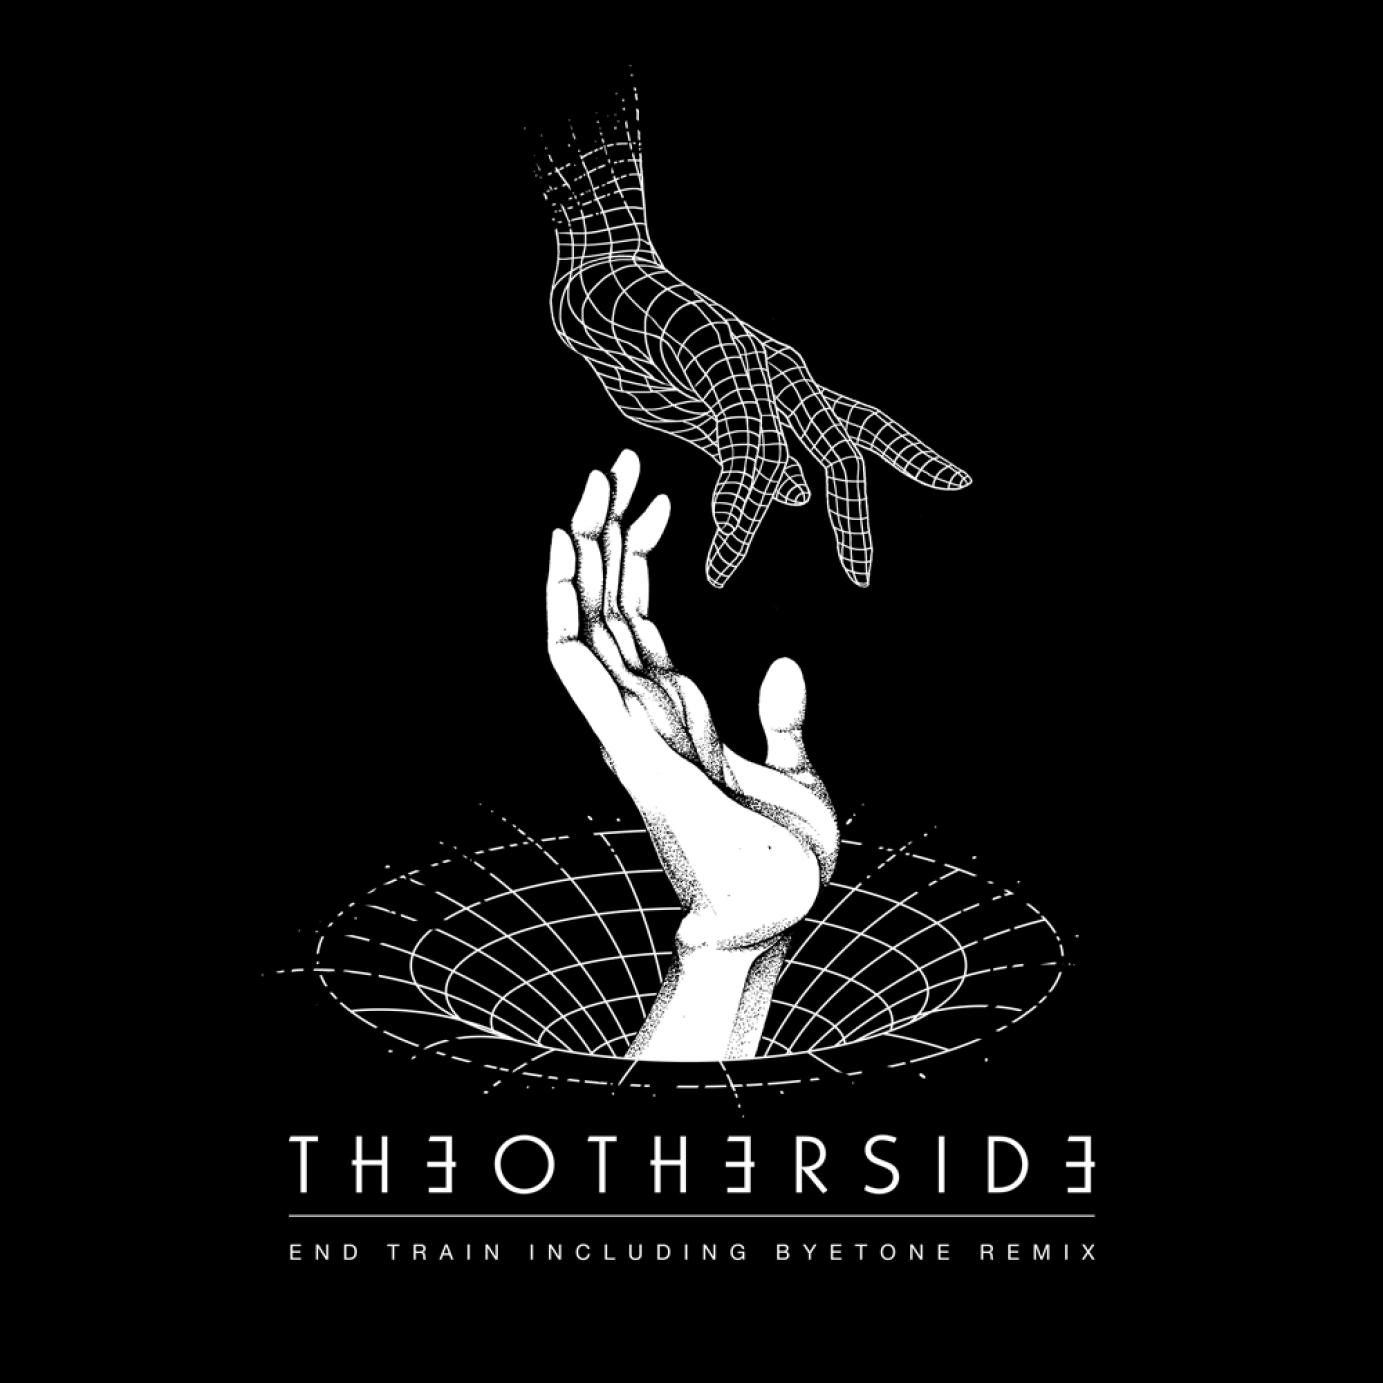 THEOTHERSIDE